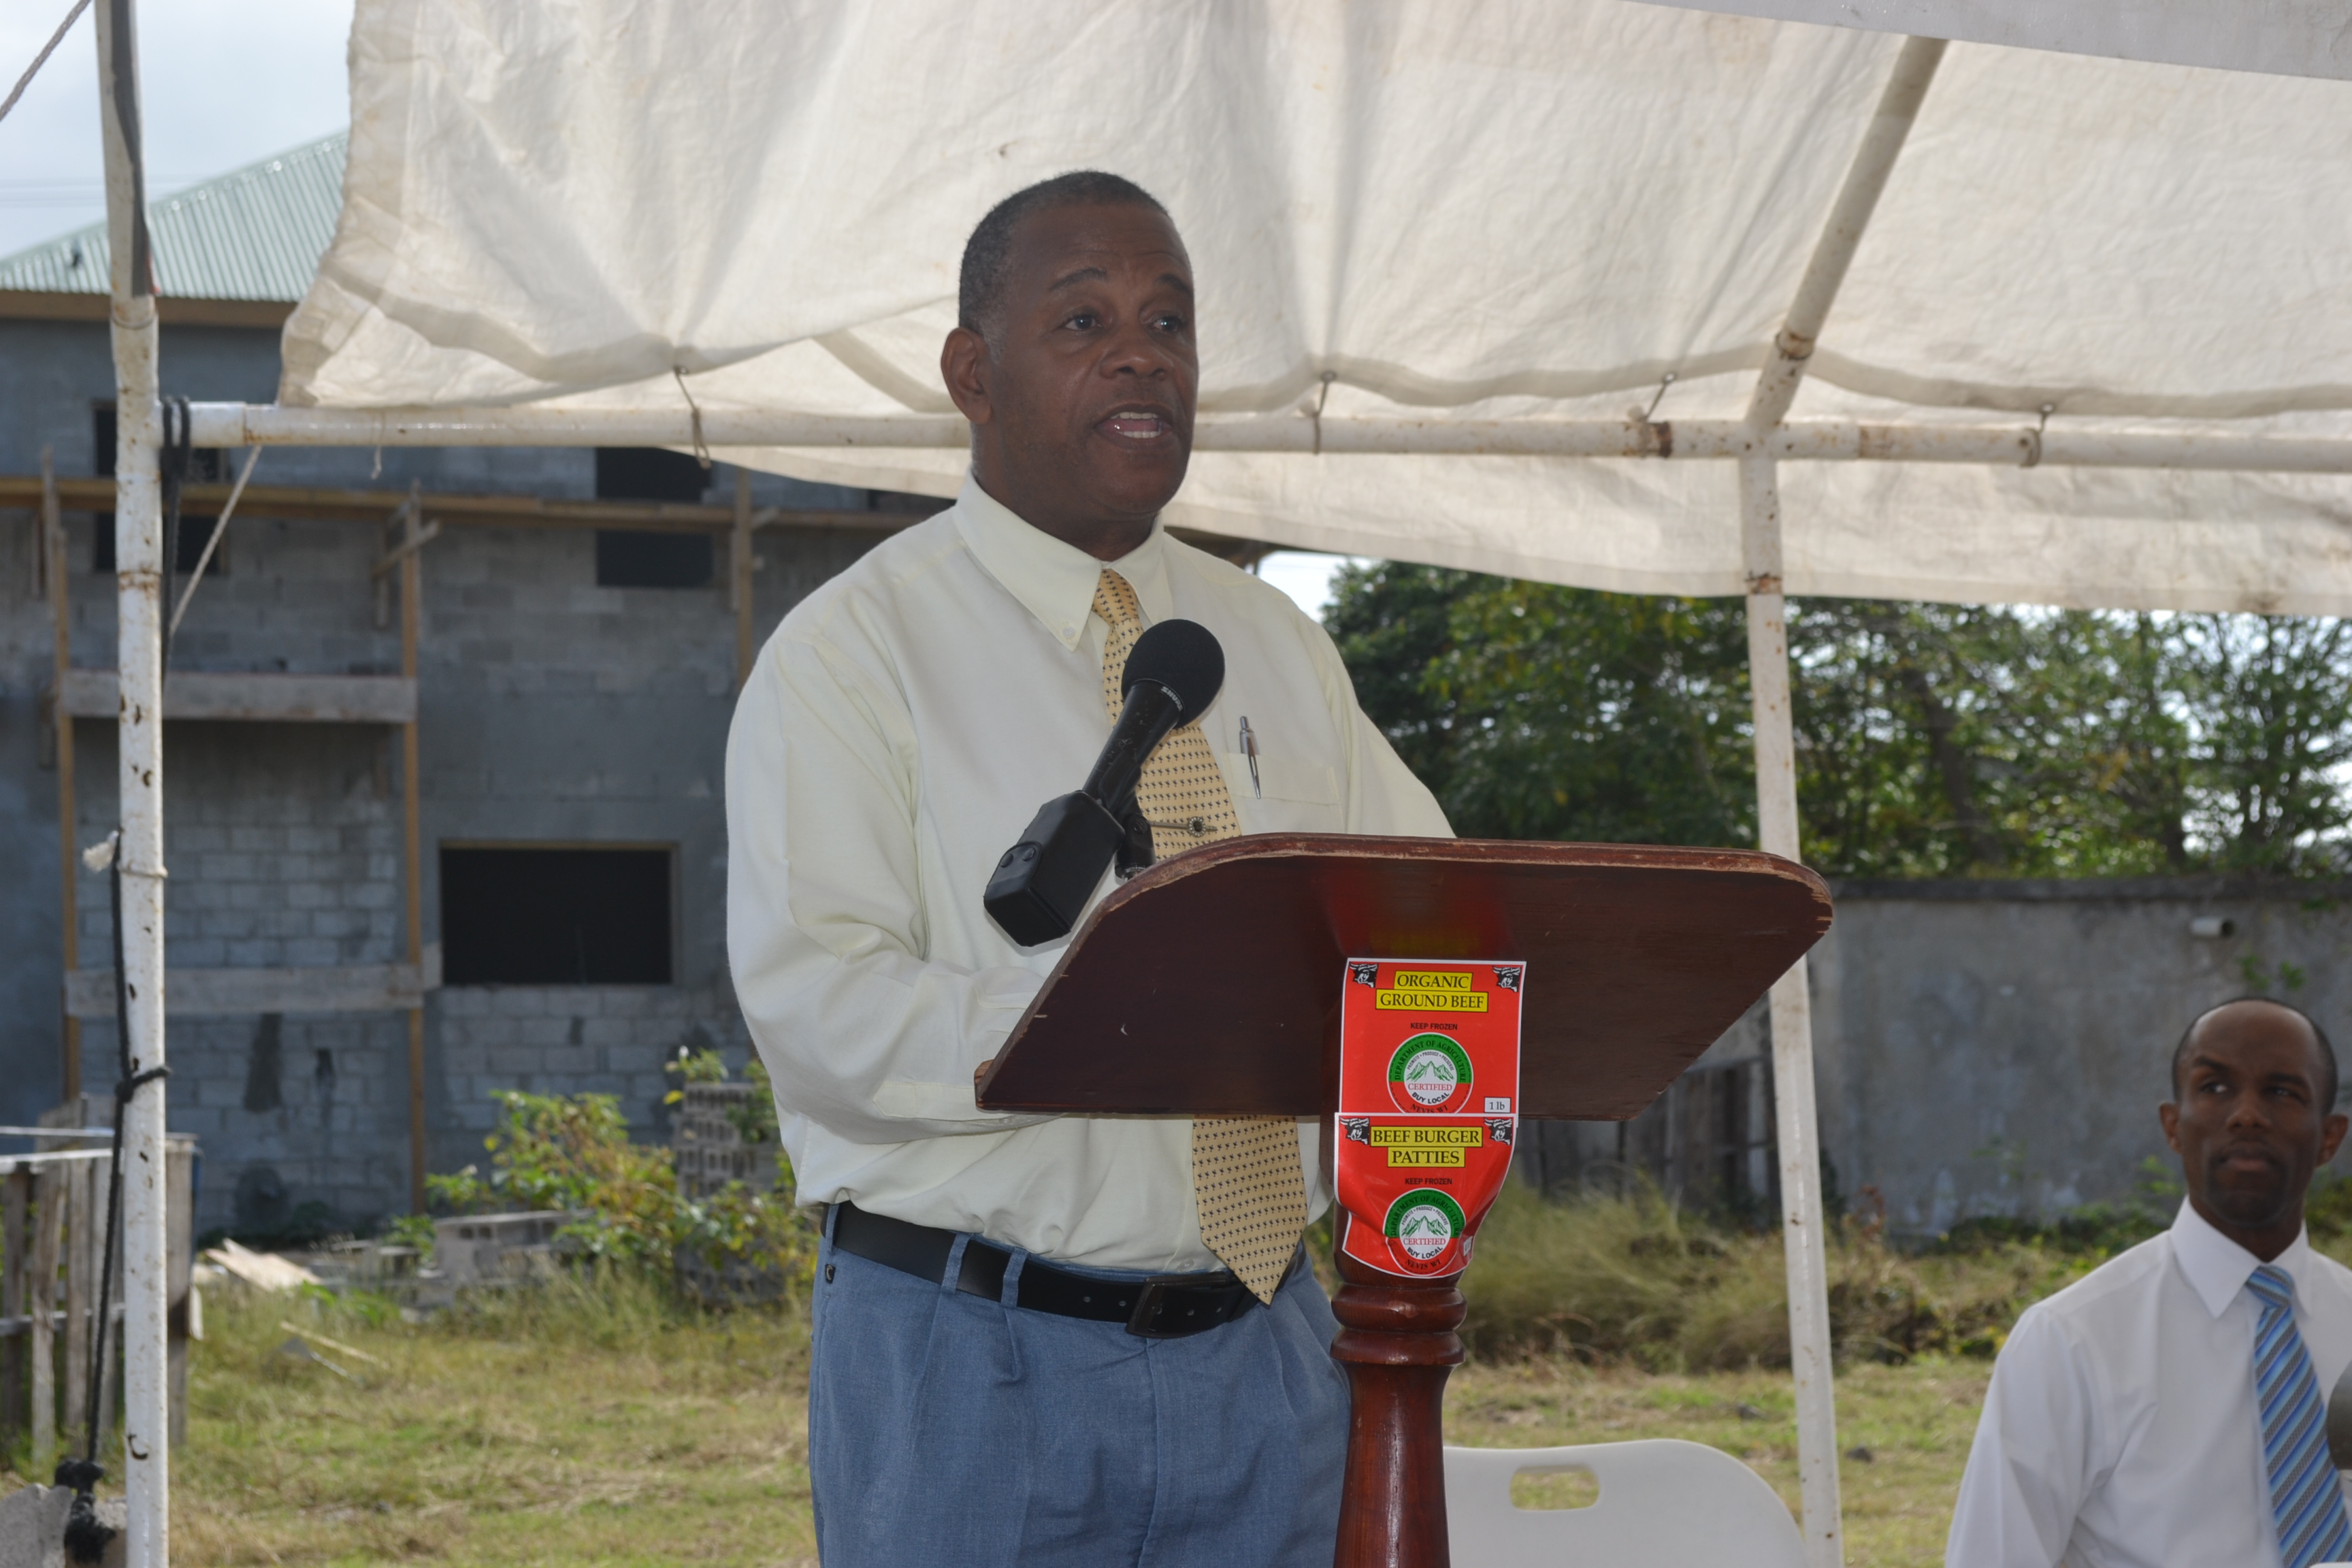 Permanent Secretary in Ministry of Agriculture Mr. Eric Evelyn delivering Welcome and Opening remarks at the Ground Breaking Ceremony for the extension of the Abattoir Division on the Abattoir Division Grounds on January 26 2016